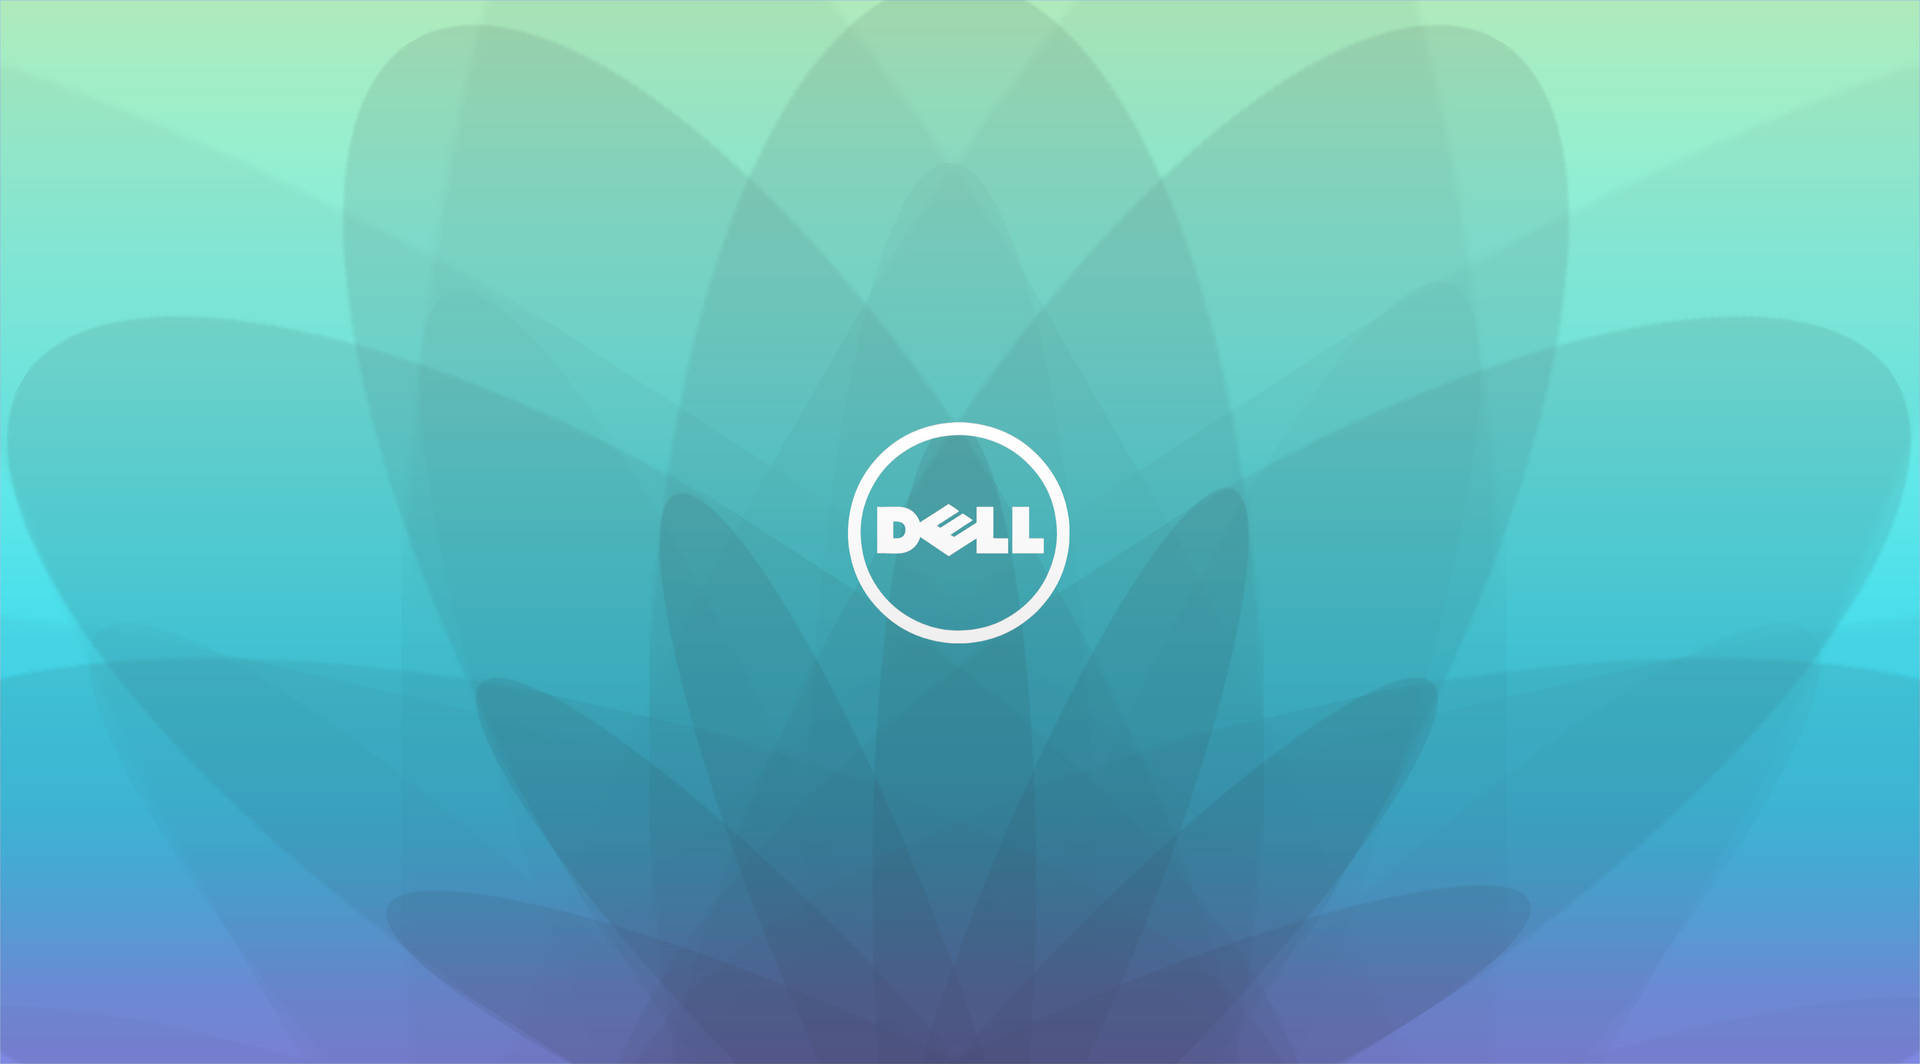 Cool Dell 4k Background Background